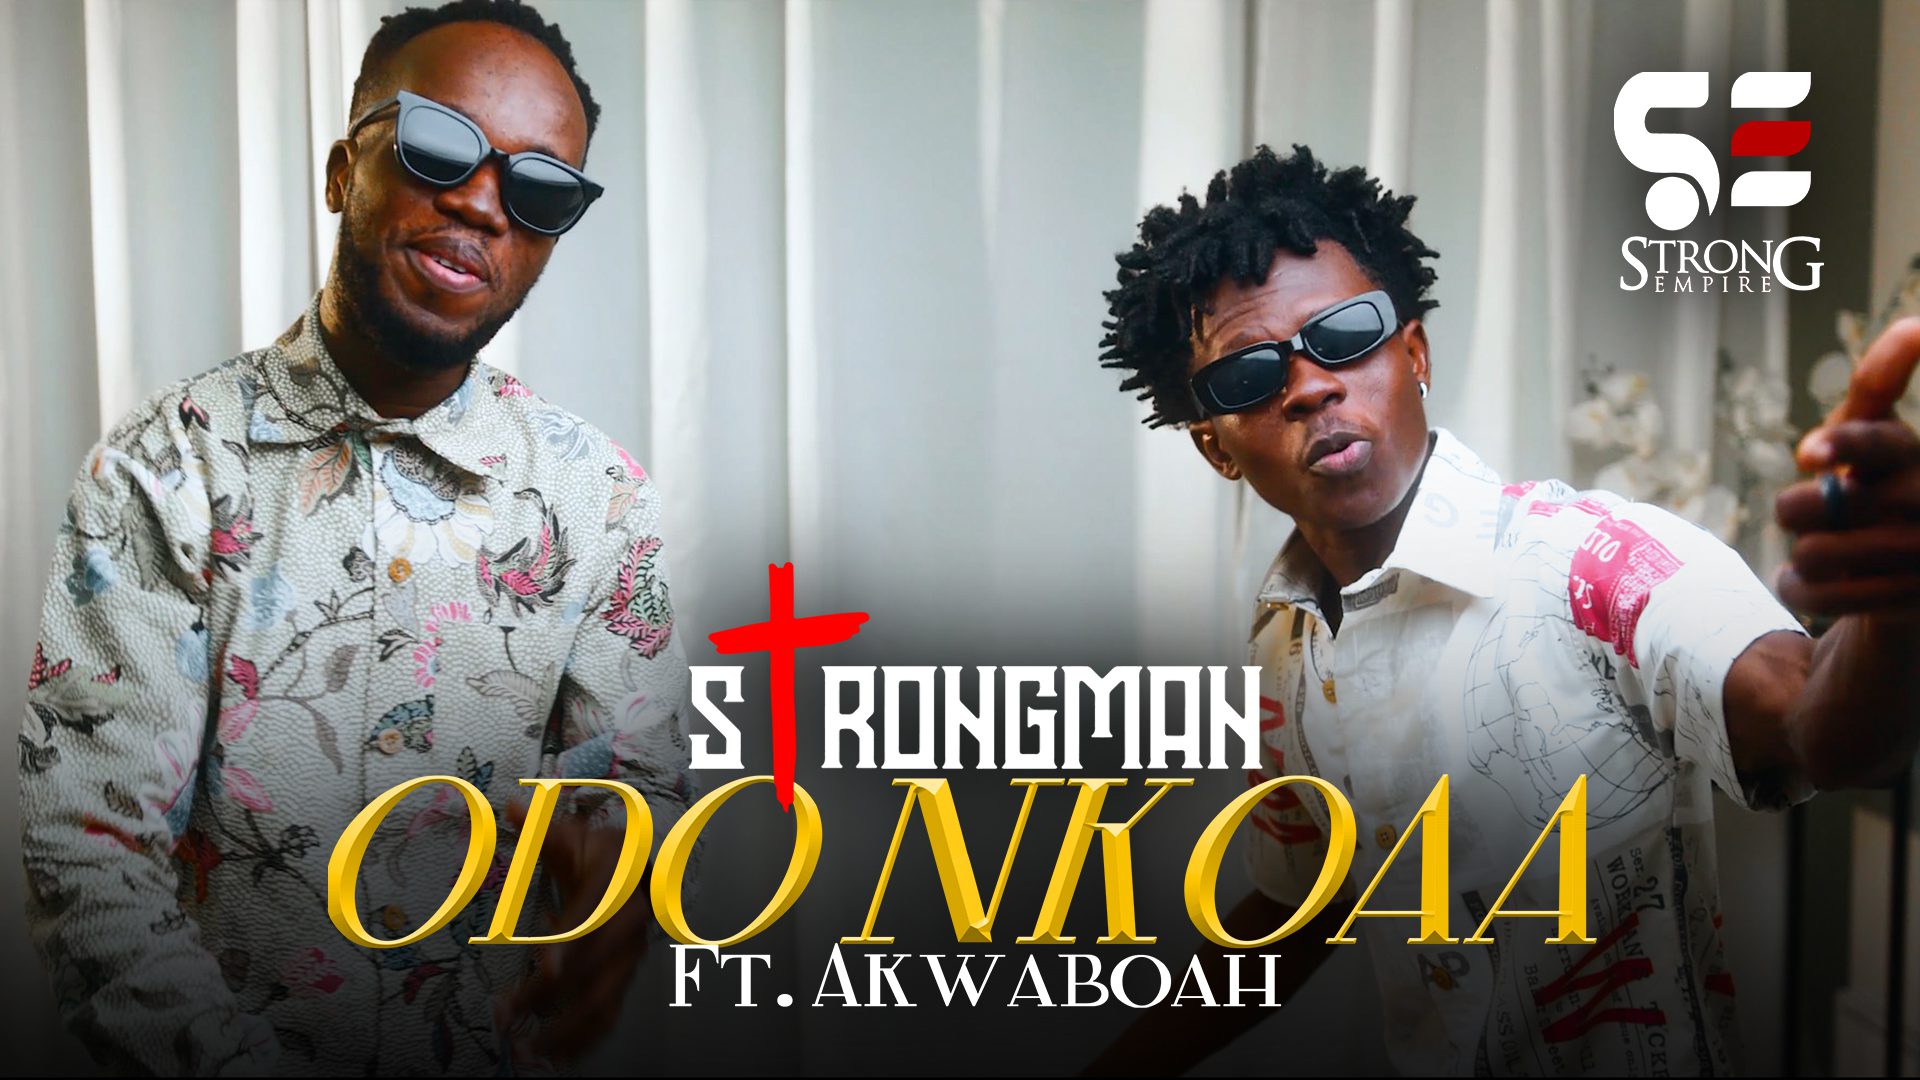 “Odo Nkoaa” By Strongman Featuring Akwaboah Receives Rave Reviews From Fans And Critics.